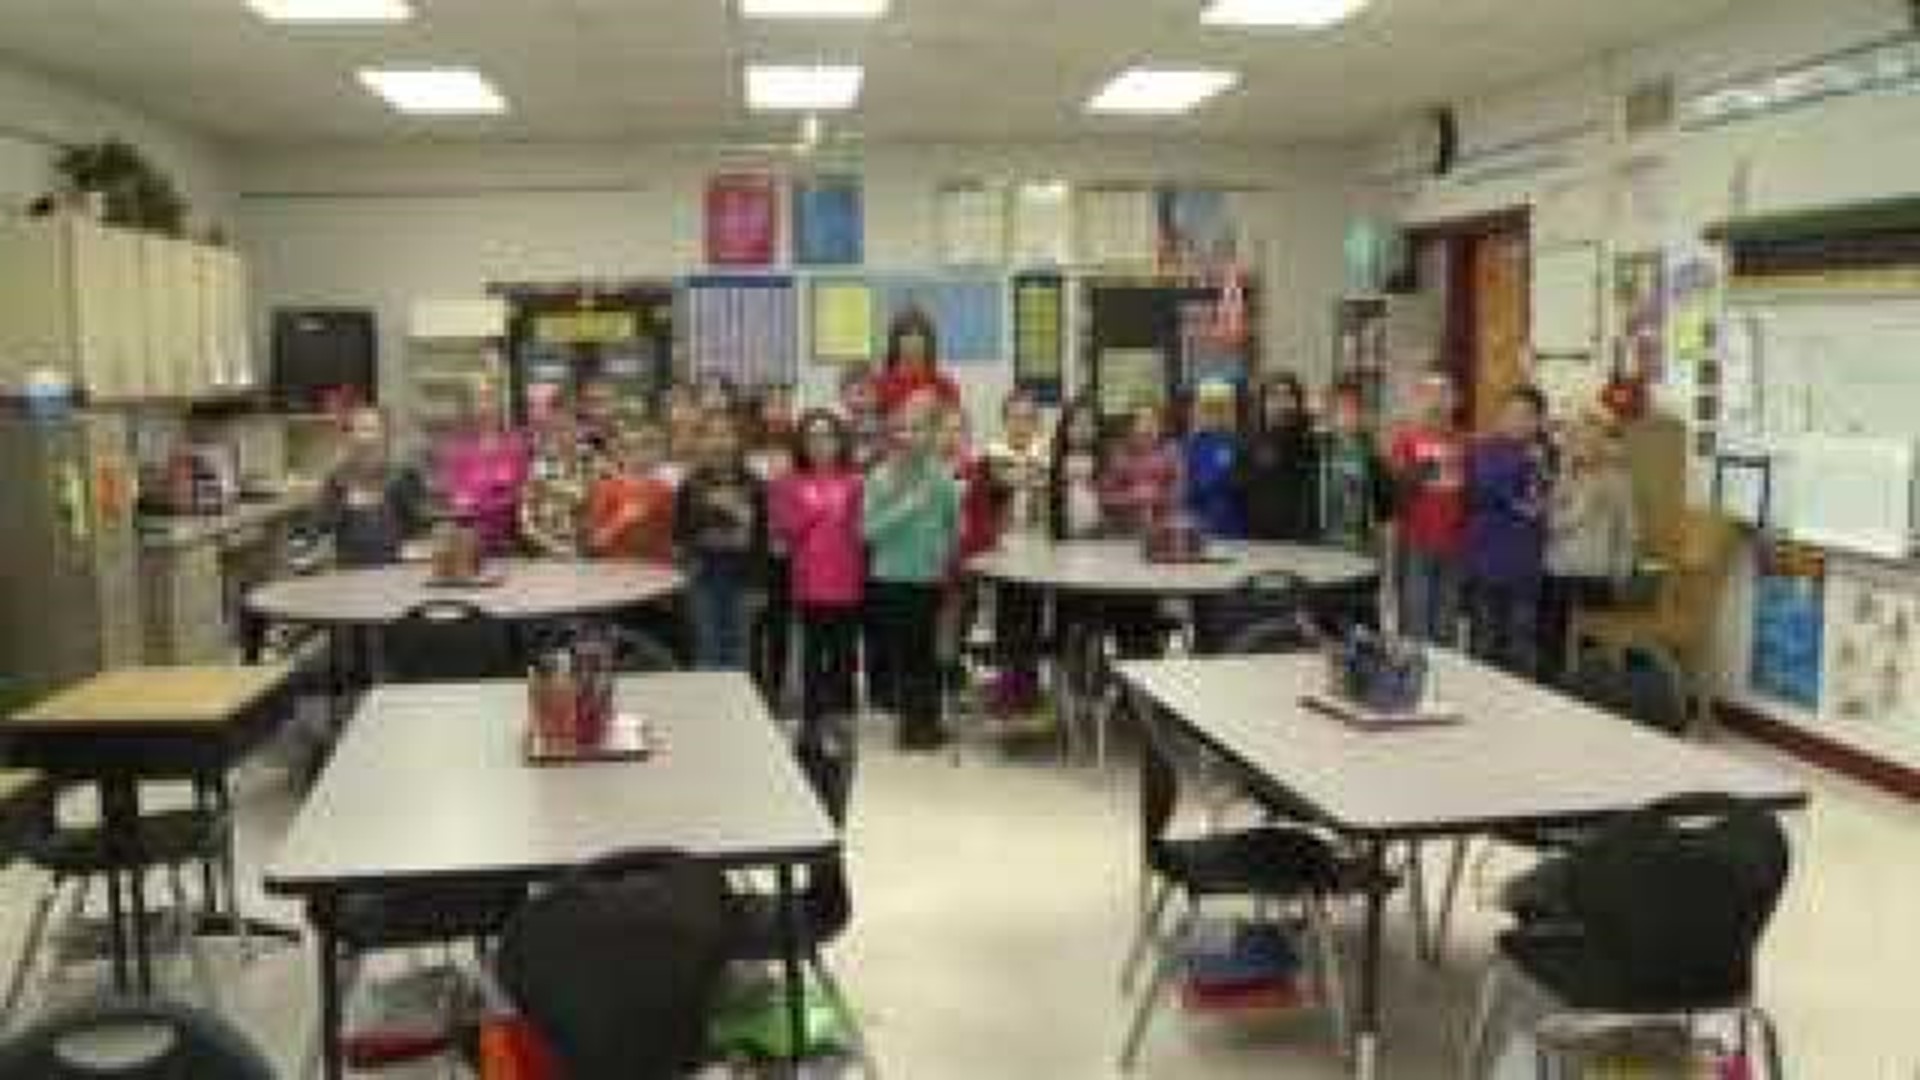 Mrs. Thoms' class says the Pledge of Allegiance